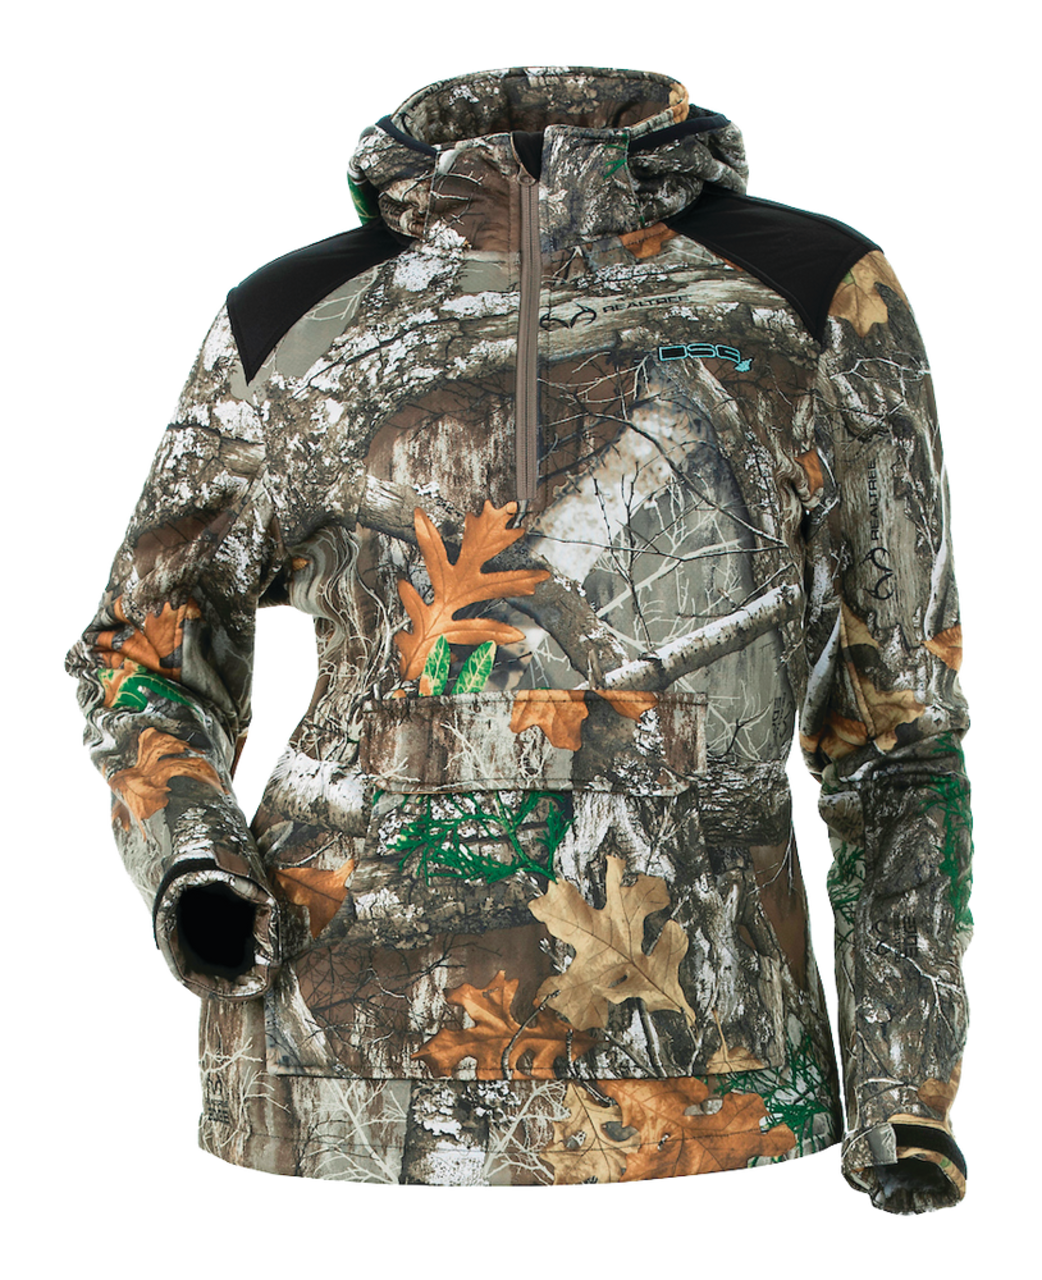 DSG Women's Breanna Fleece Pullover Hunting Jacket with Removable Hood, Camo